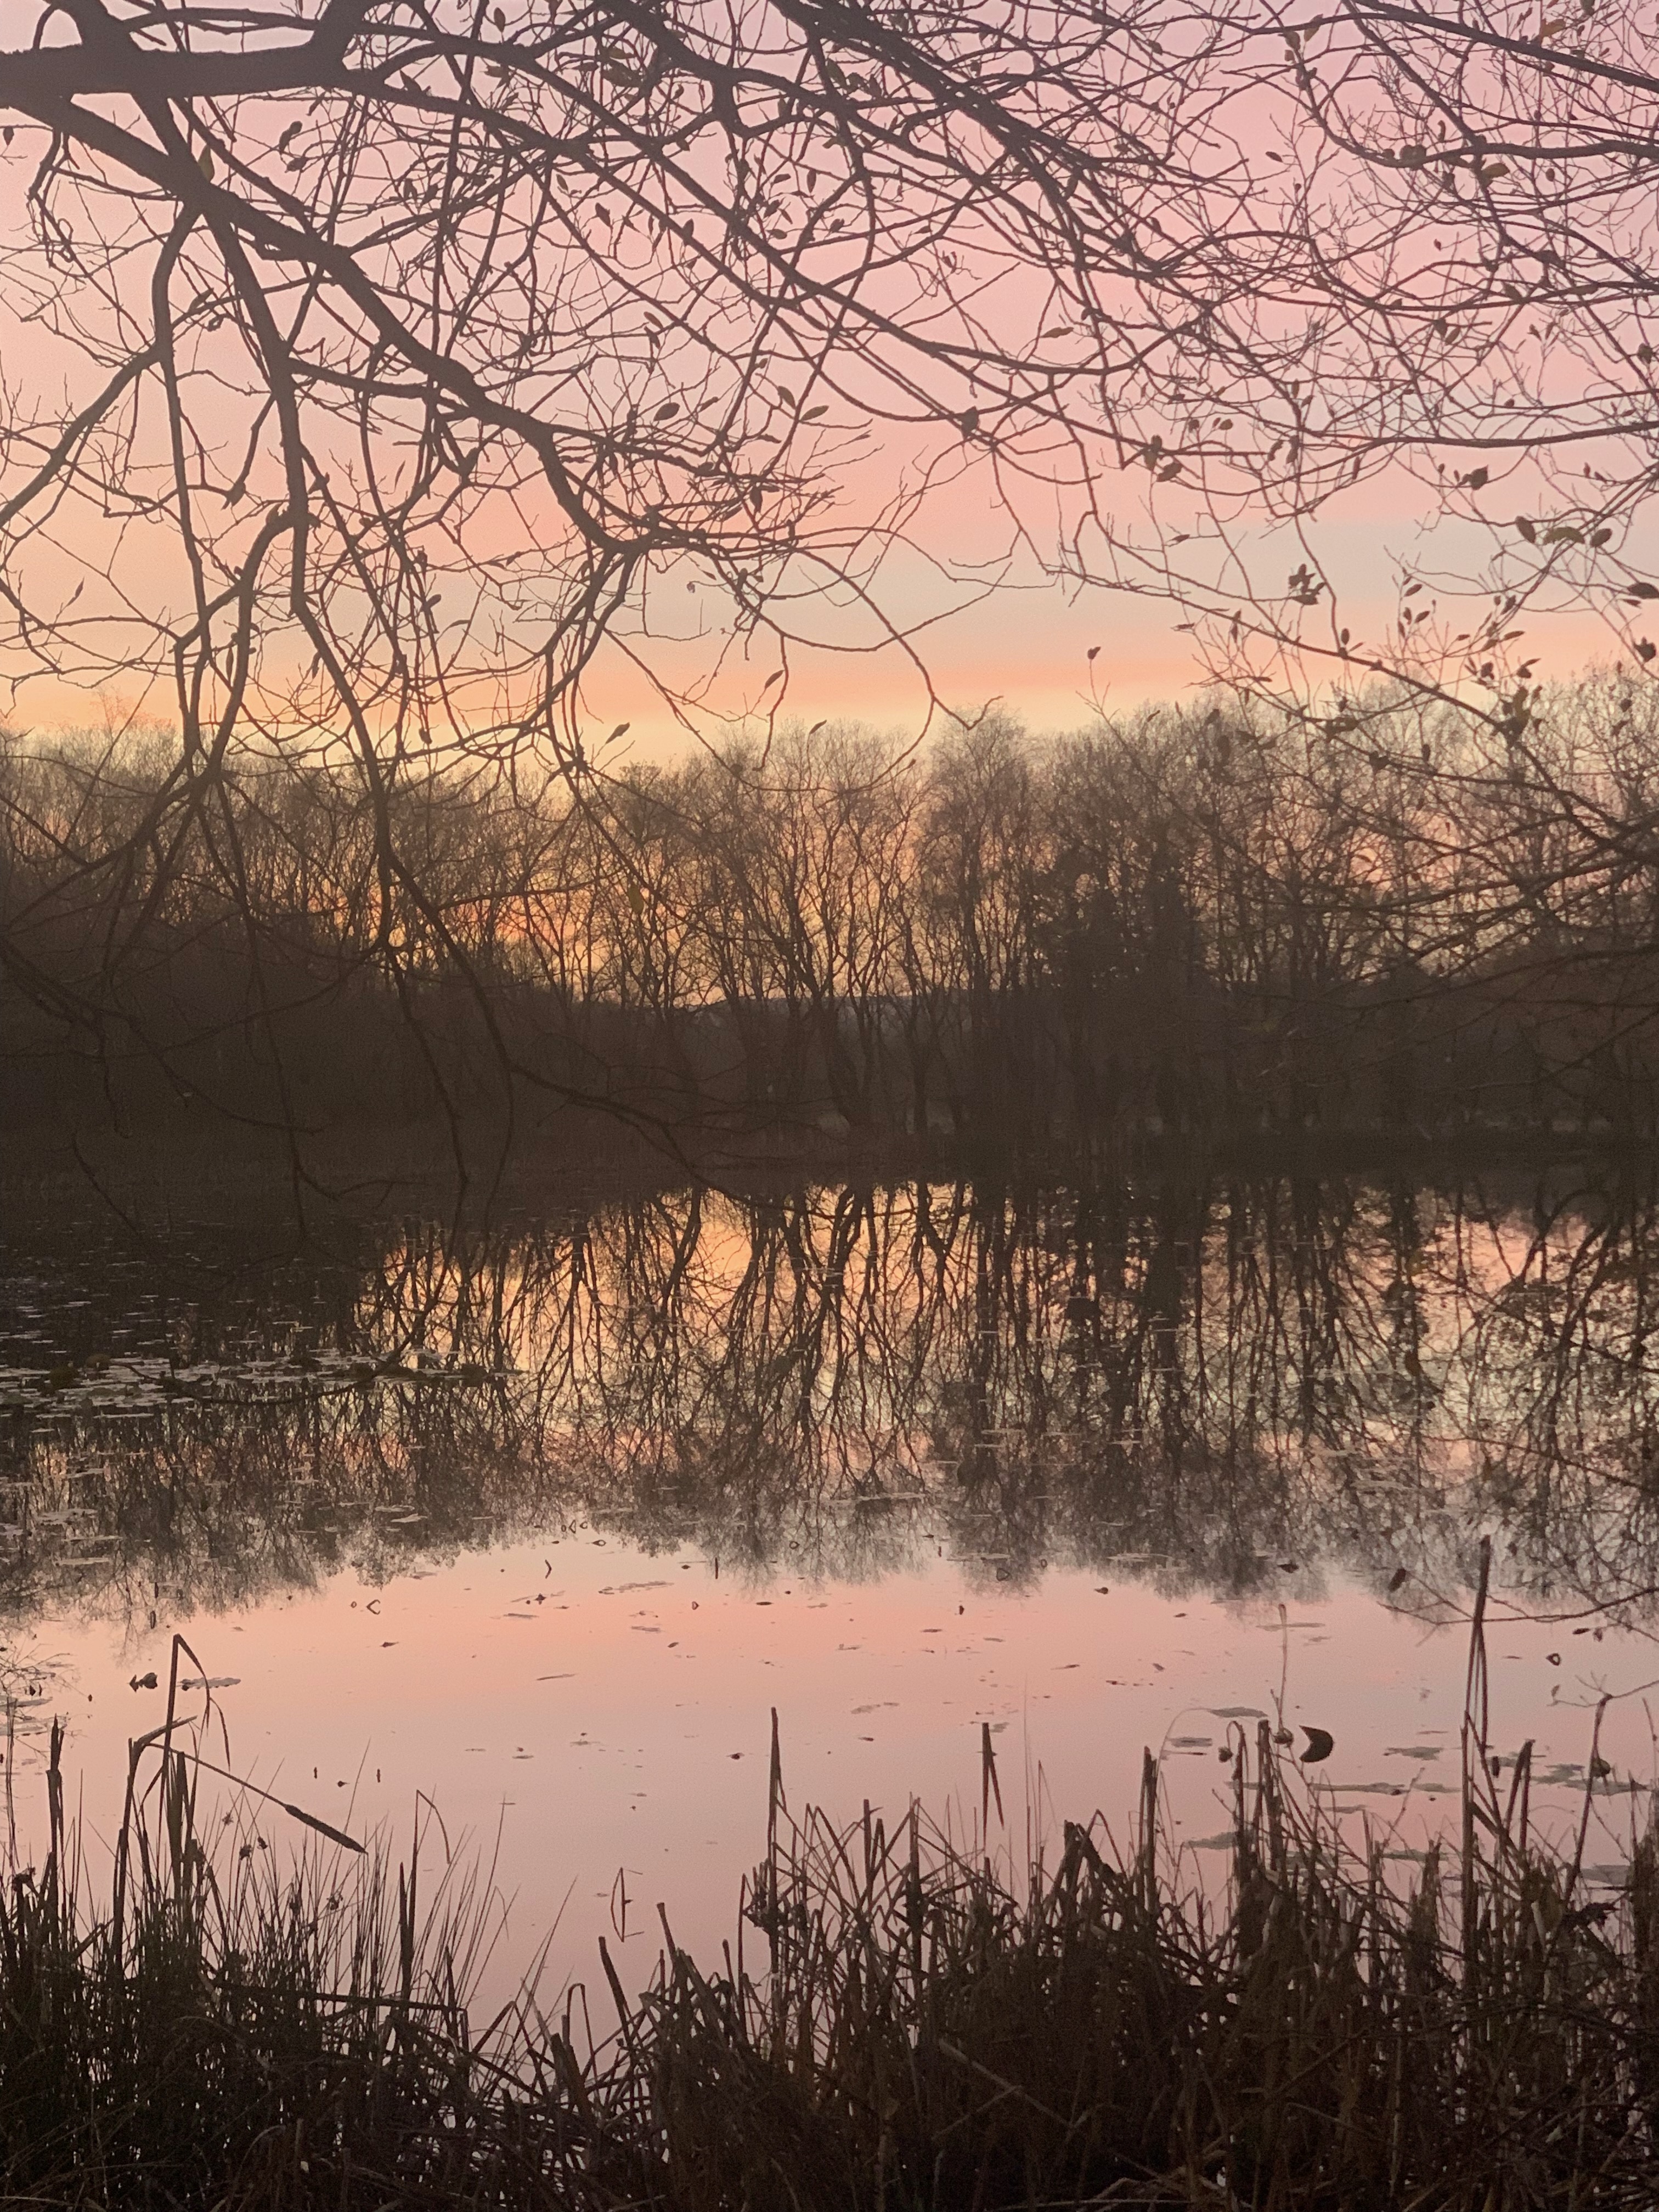 A Picture of a lake at sunset with reflection